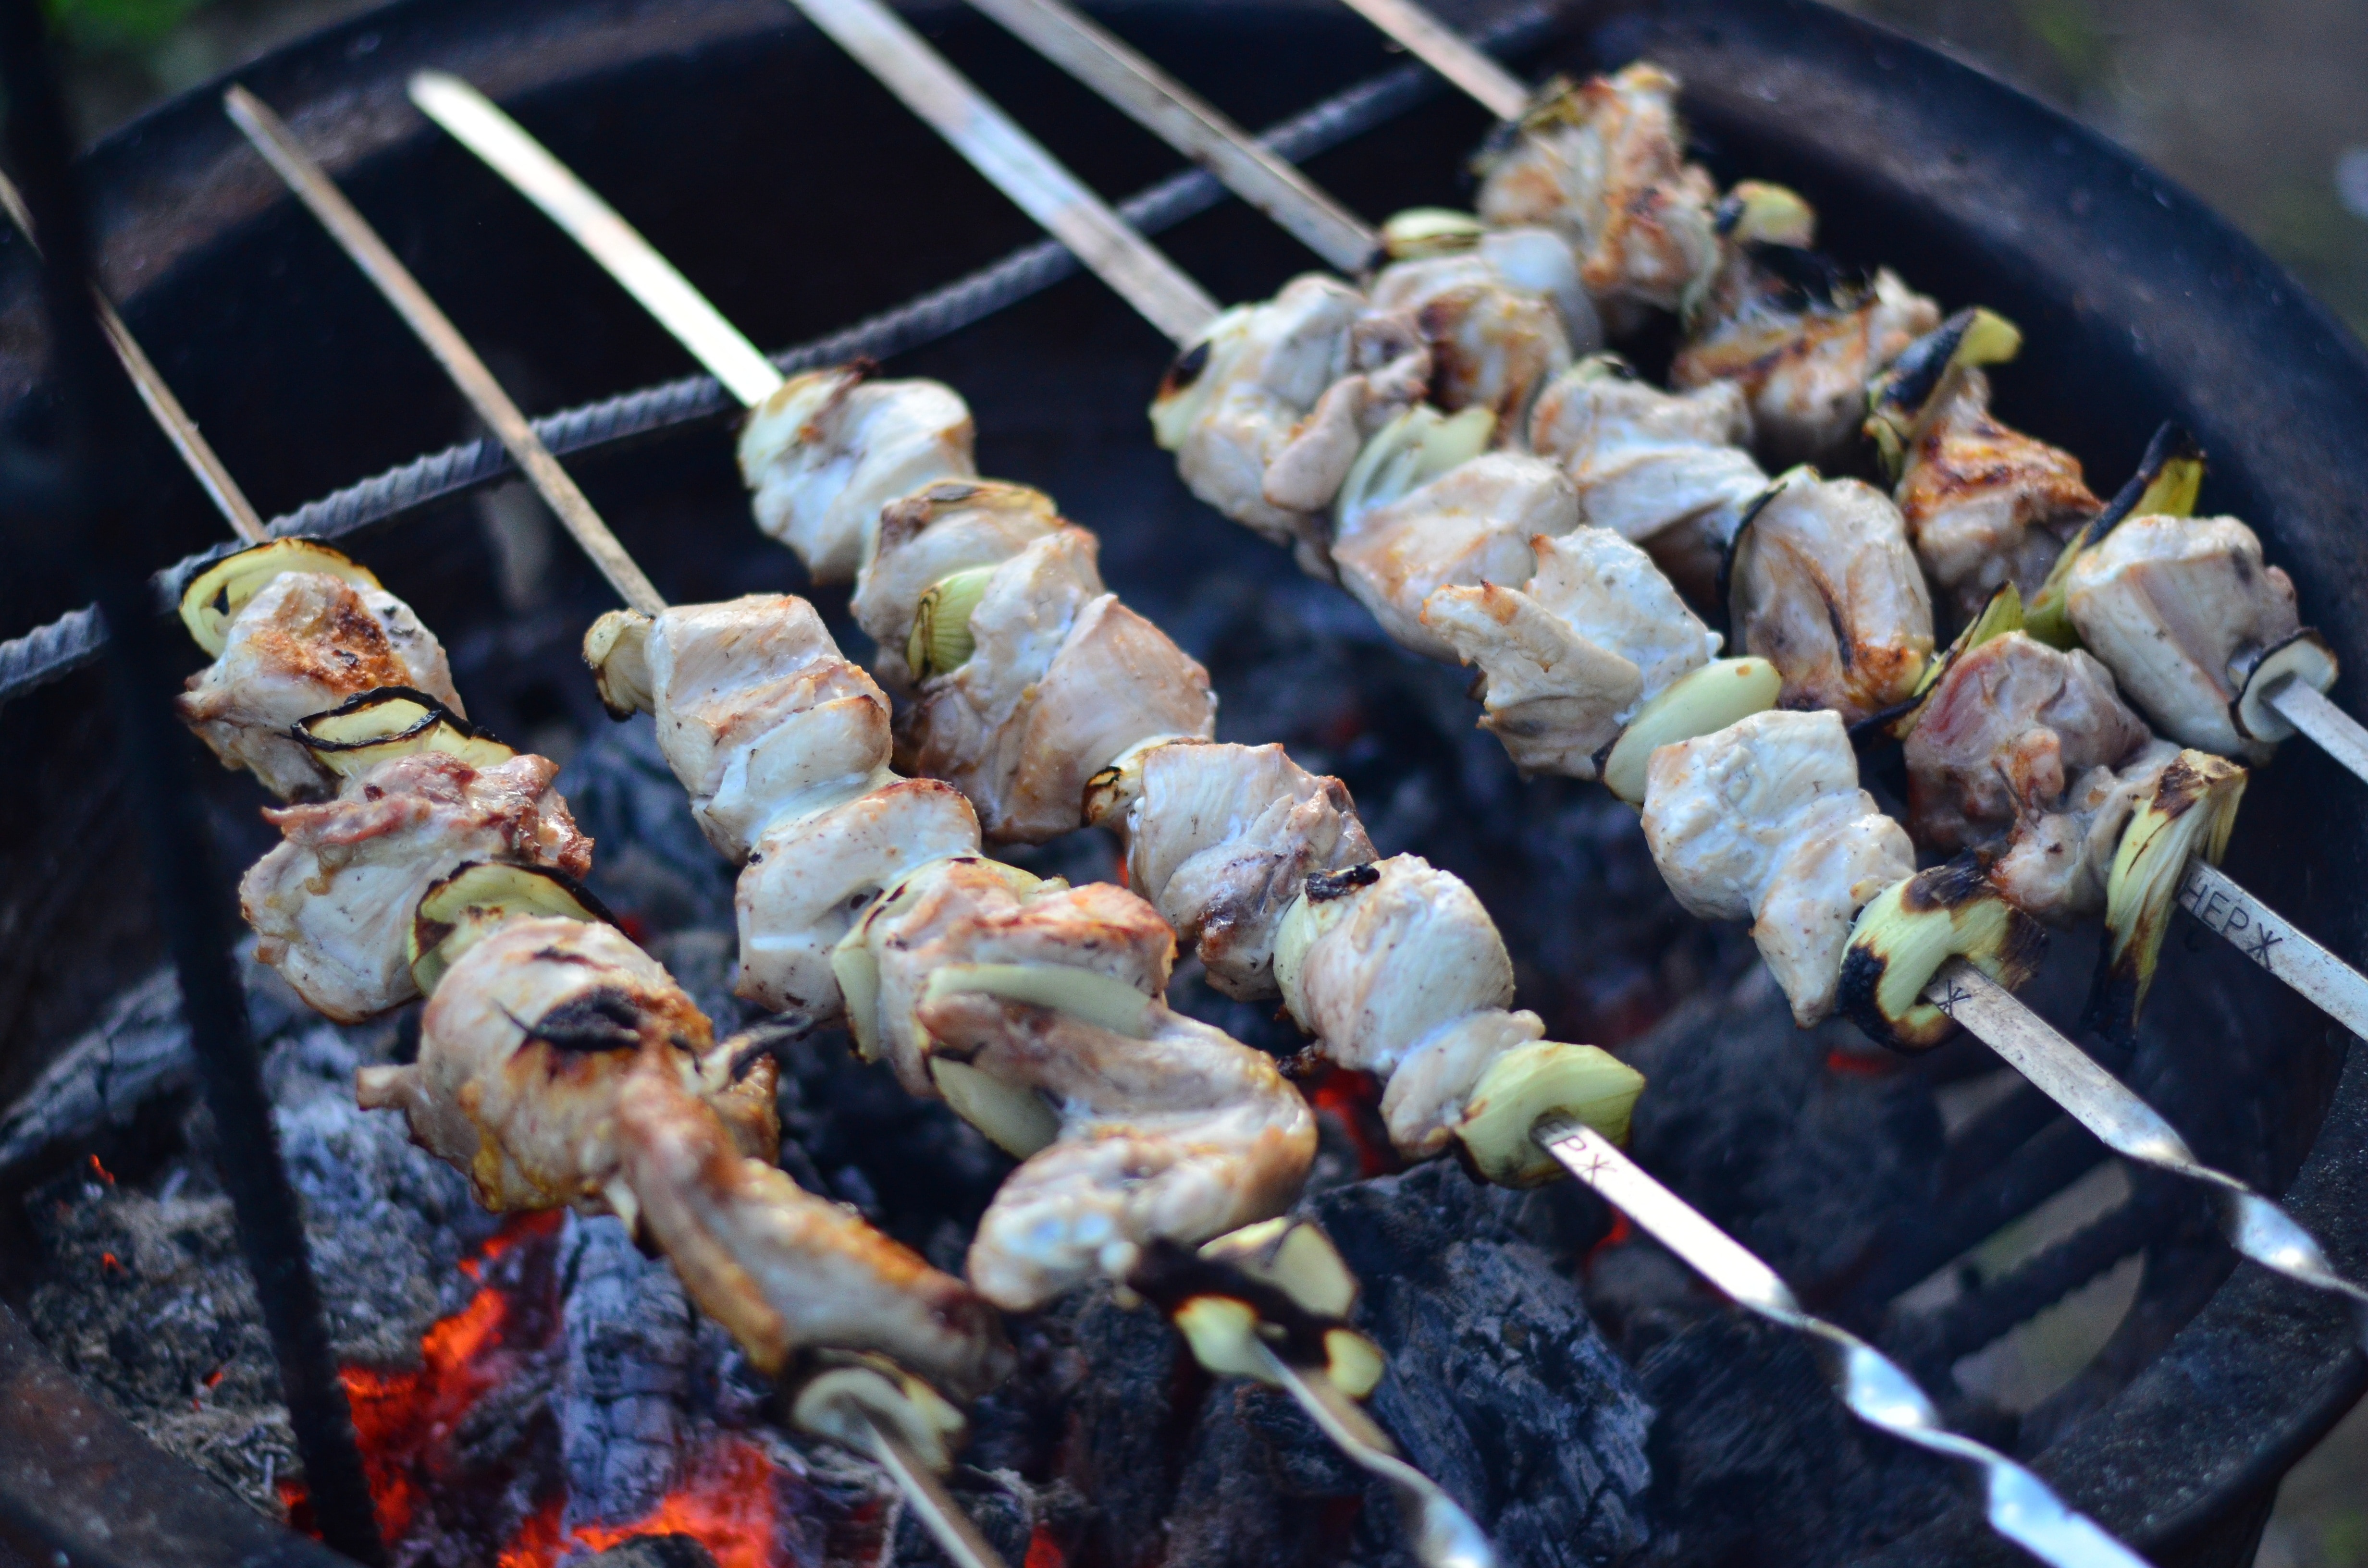 Meat, Fried Meat, Shish Kebab, Mangal, barbecue grill, barbecue